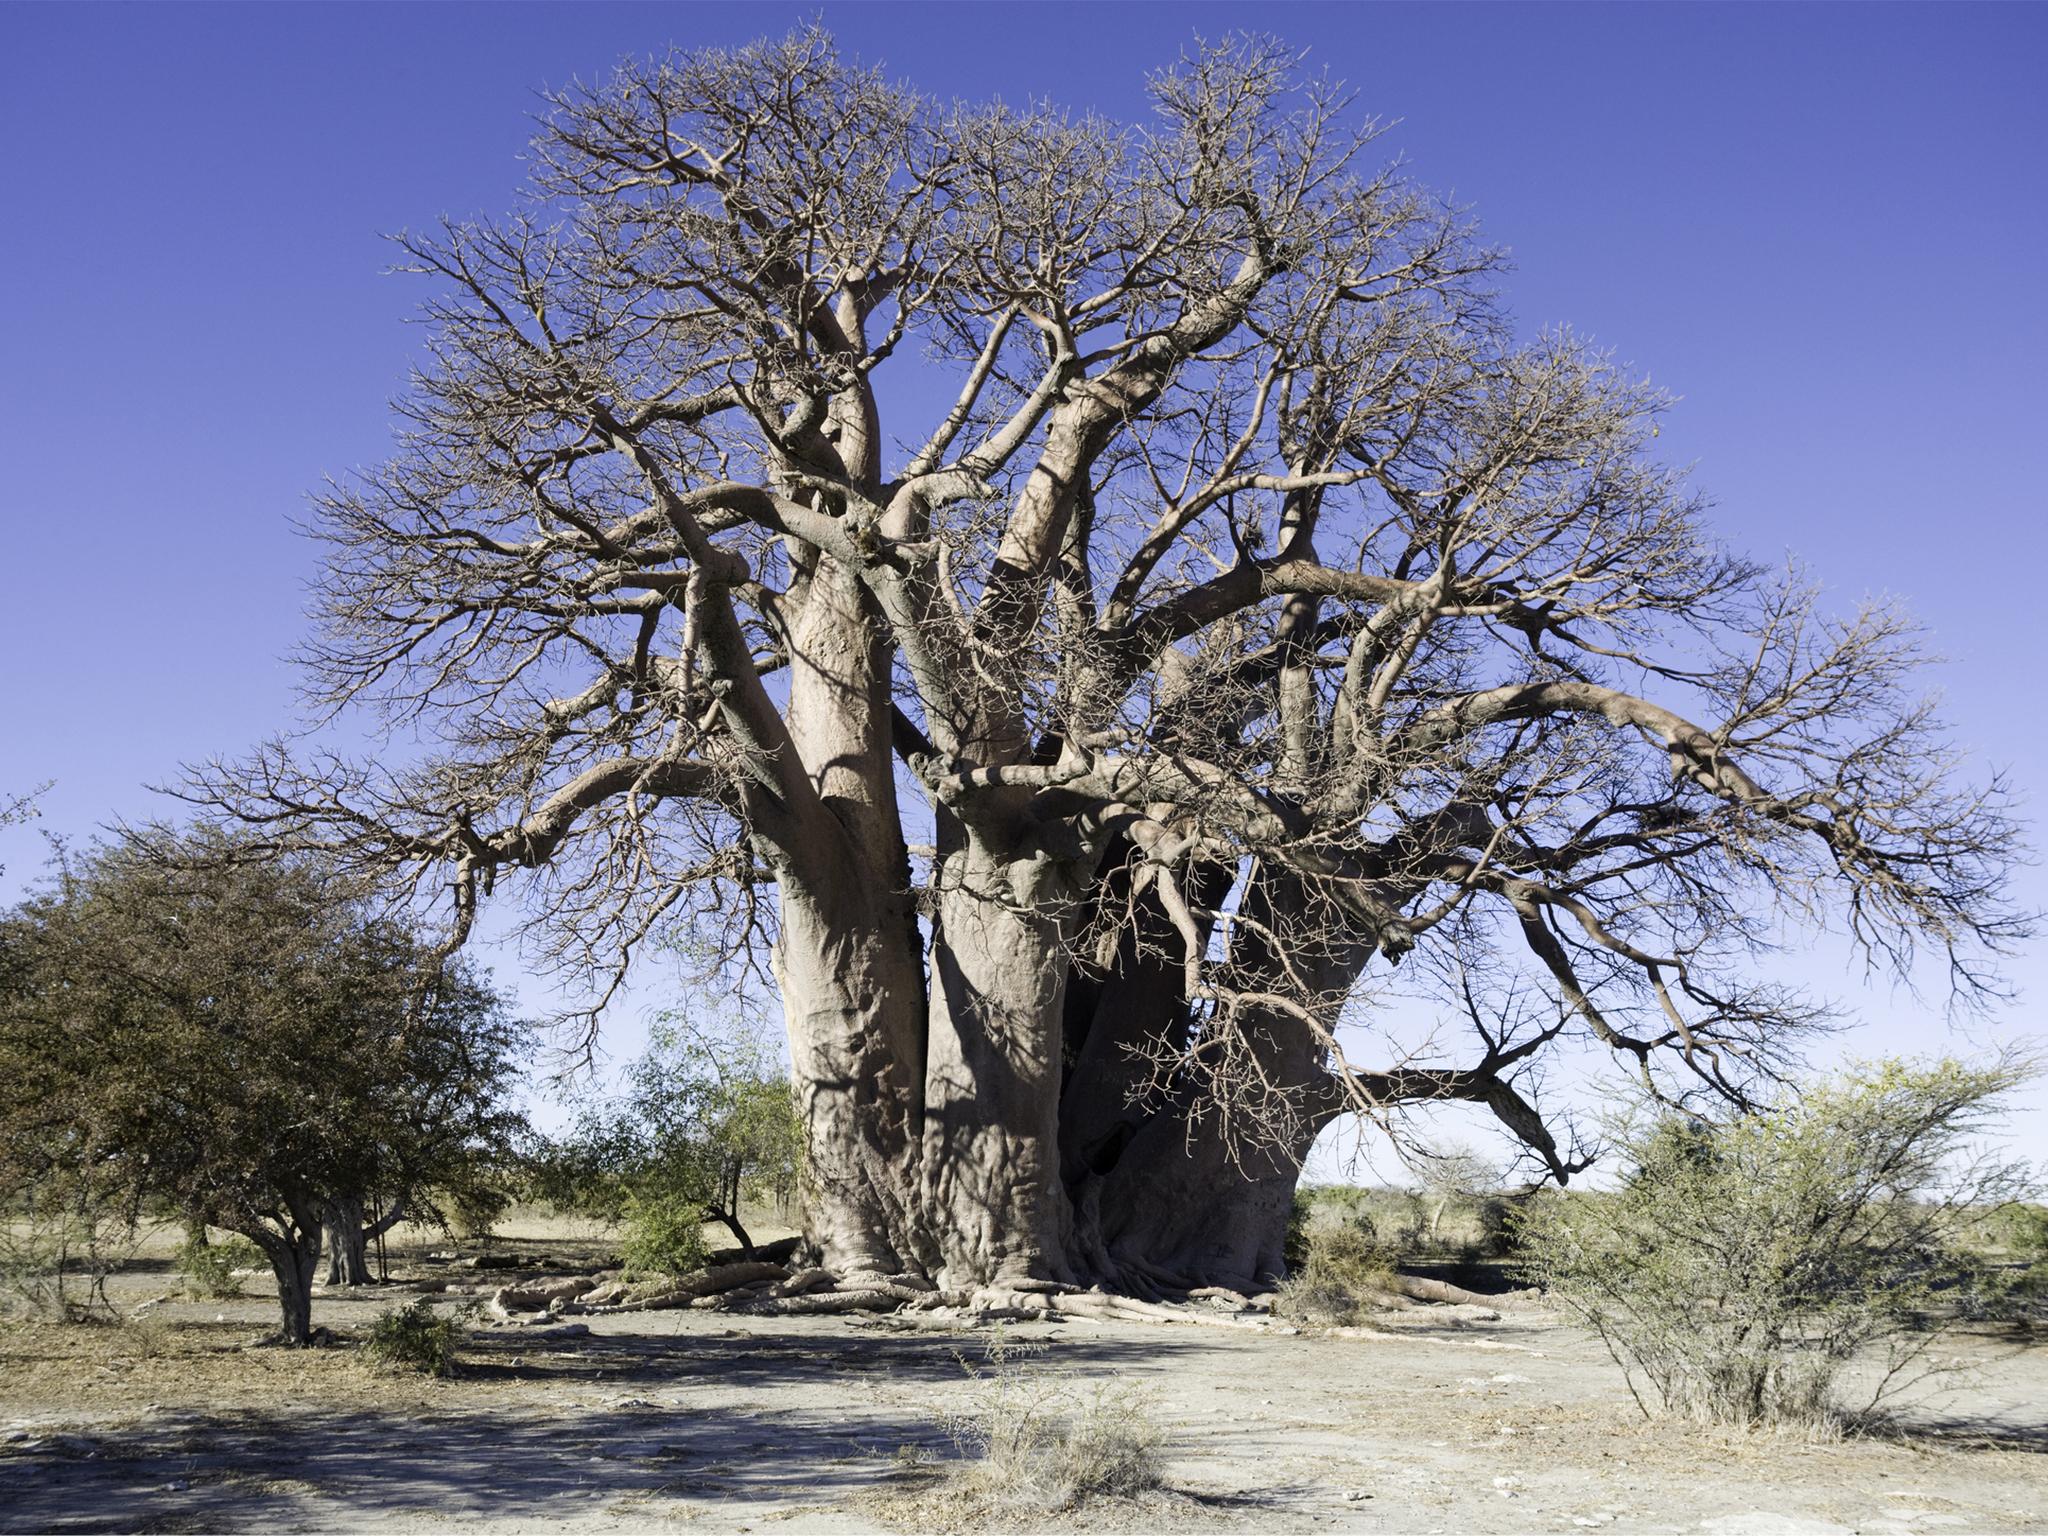 Botswana's Chapman's baobab is the best known victim of the sudden deaths